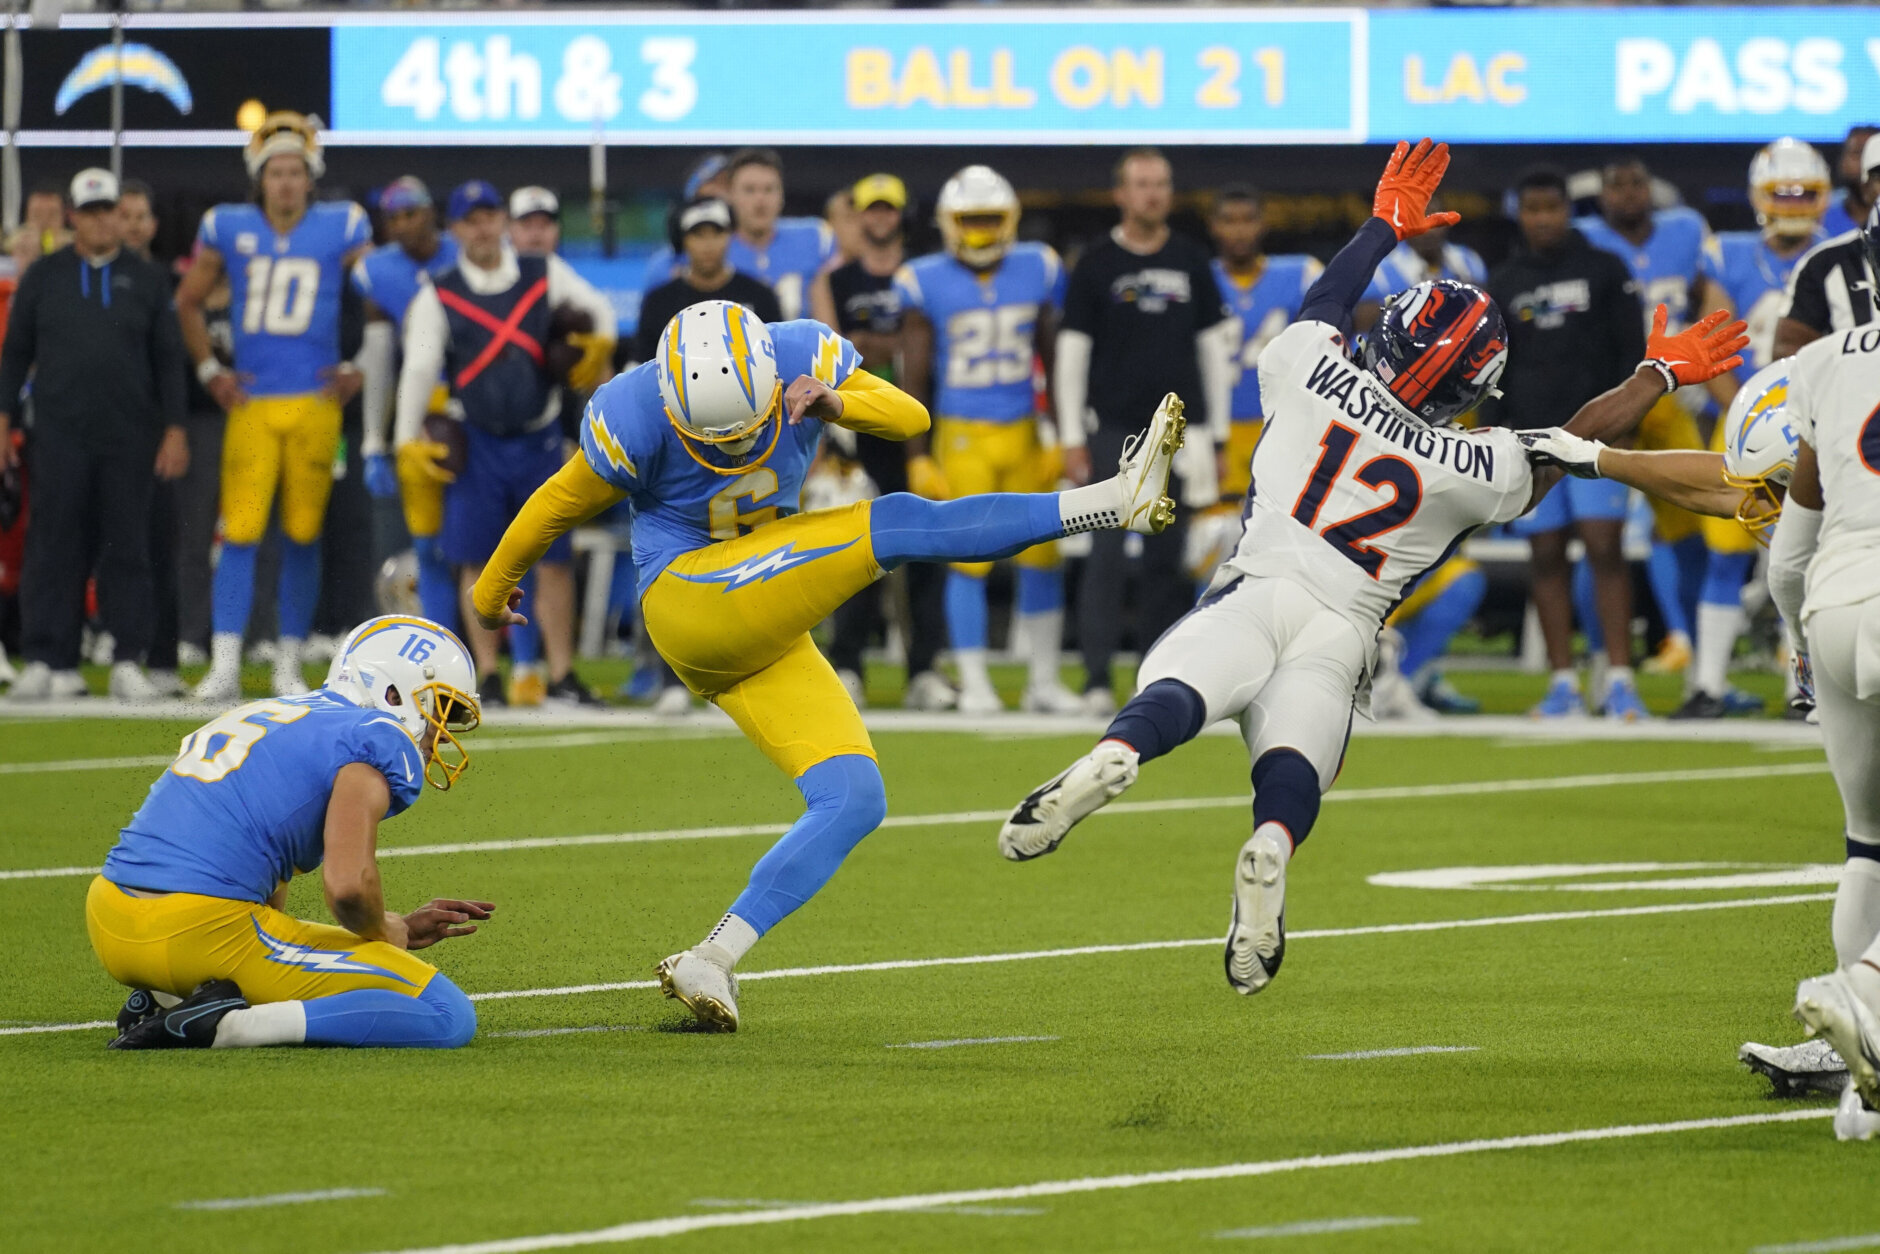 <p><b><i>Broncos 16</i></b><br />
<b><i>Chargers 19 (OT)</i></b></p>
<p>All hail Dustin Hopkins, the former Washington kicker who shrugged off a hamstring injury to make all four of his field goals &#8212; including the game-winner in overtime to save us from another minute of this eyesore. His performance, along with that of fellow Washington alum DeAndre Carter, is yet another example of the Ron Rivera regime moving on from the wrong players.</p>
<p>And Denver &#8230; after a primetime flop to open last week, this week they capped Week 6 with another primetime turd in which the two teams combined to commit 19 penalties totaling 240 yards (for context, the Broncos&#8217; &#8220;franchise&#8221; QB <a href="https://twitter.com/ZacStevensDNVR/status/1582221659833974784?s=20&amp;t=254vHAihdZy-gbFotE6iOw">went backwards after halftime</a> and threw for only 188 yards). The NFL needs to alter Denver&#8217;s schedule and keep this clown car parked in the 1 p.m. Sunday slot for the rest of the season.</p>
